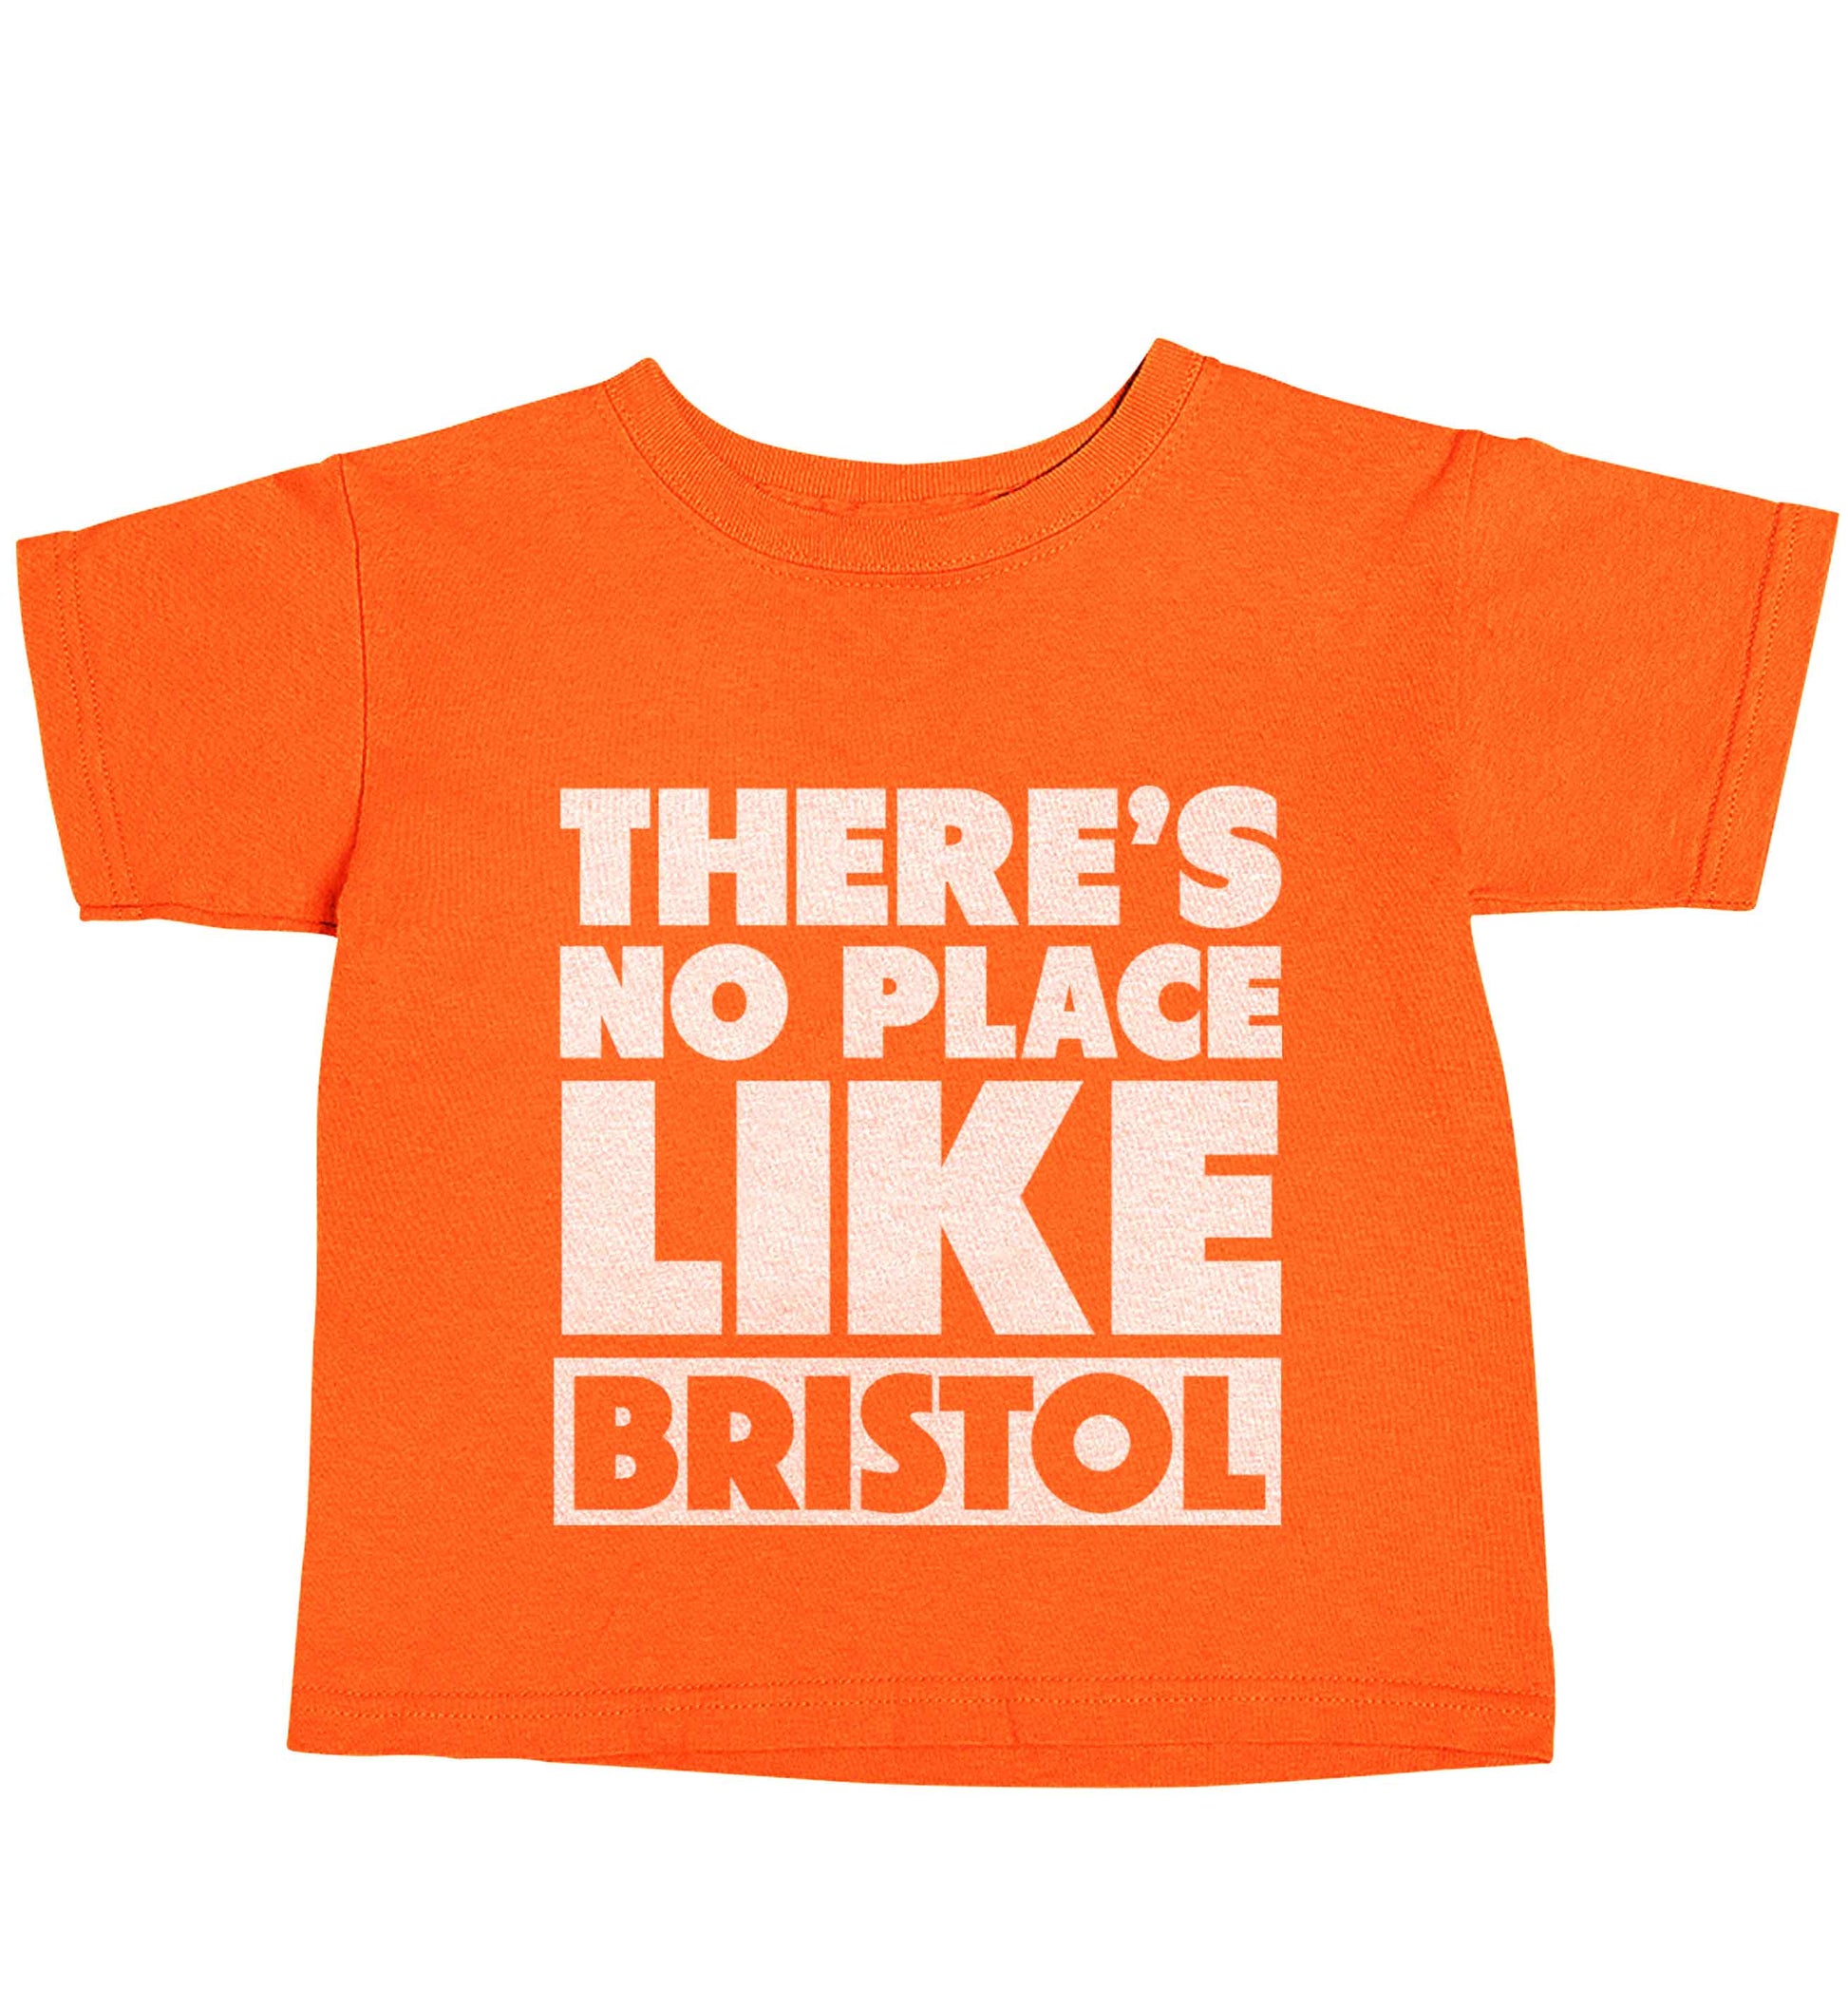 There's no place like Bristol orange baby toddler Tshirt 2 Years